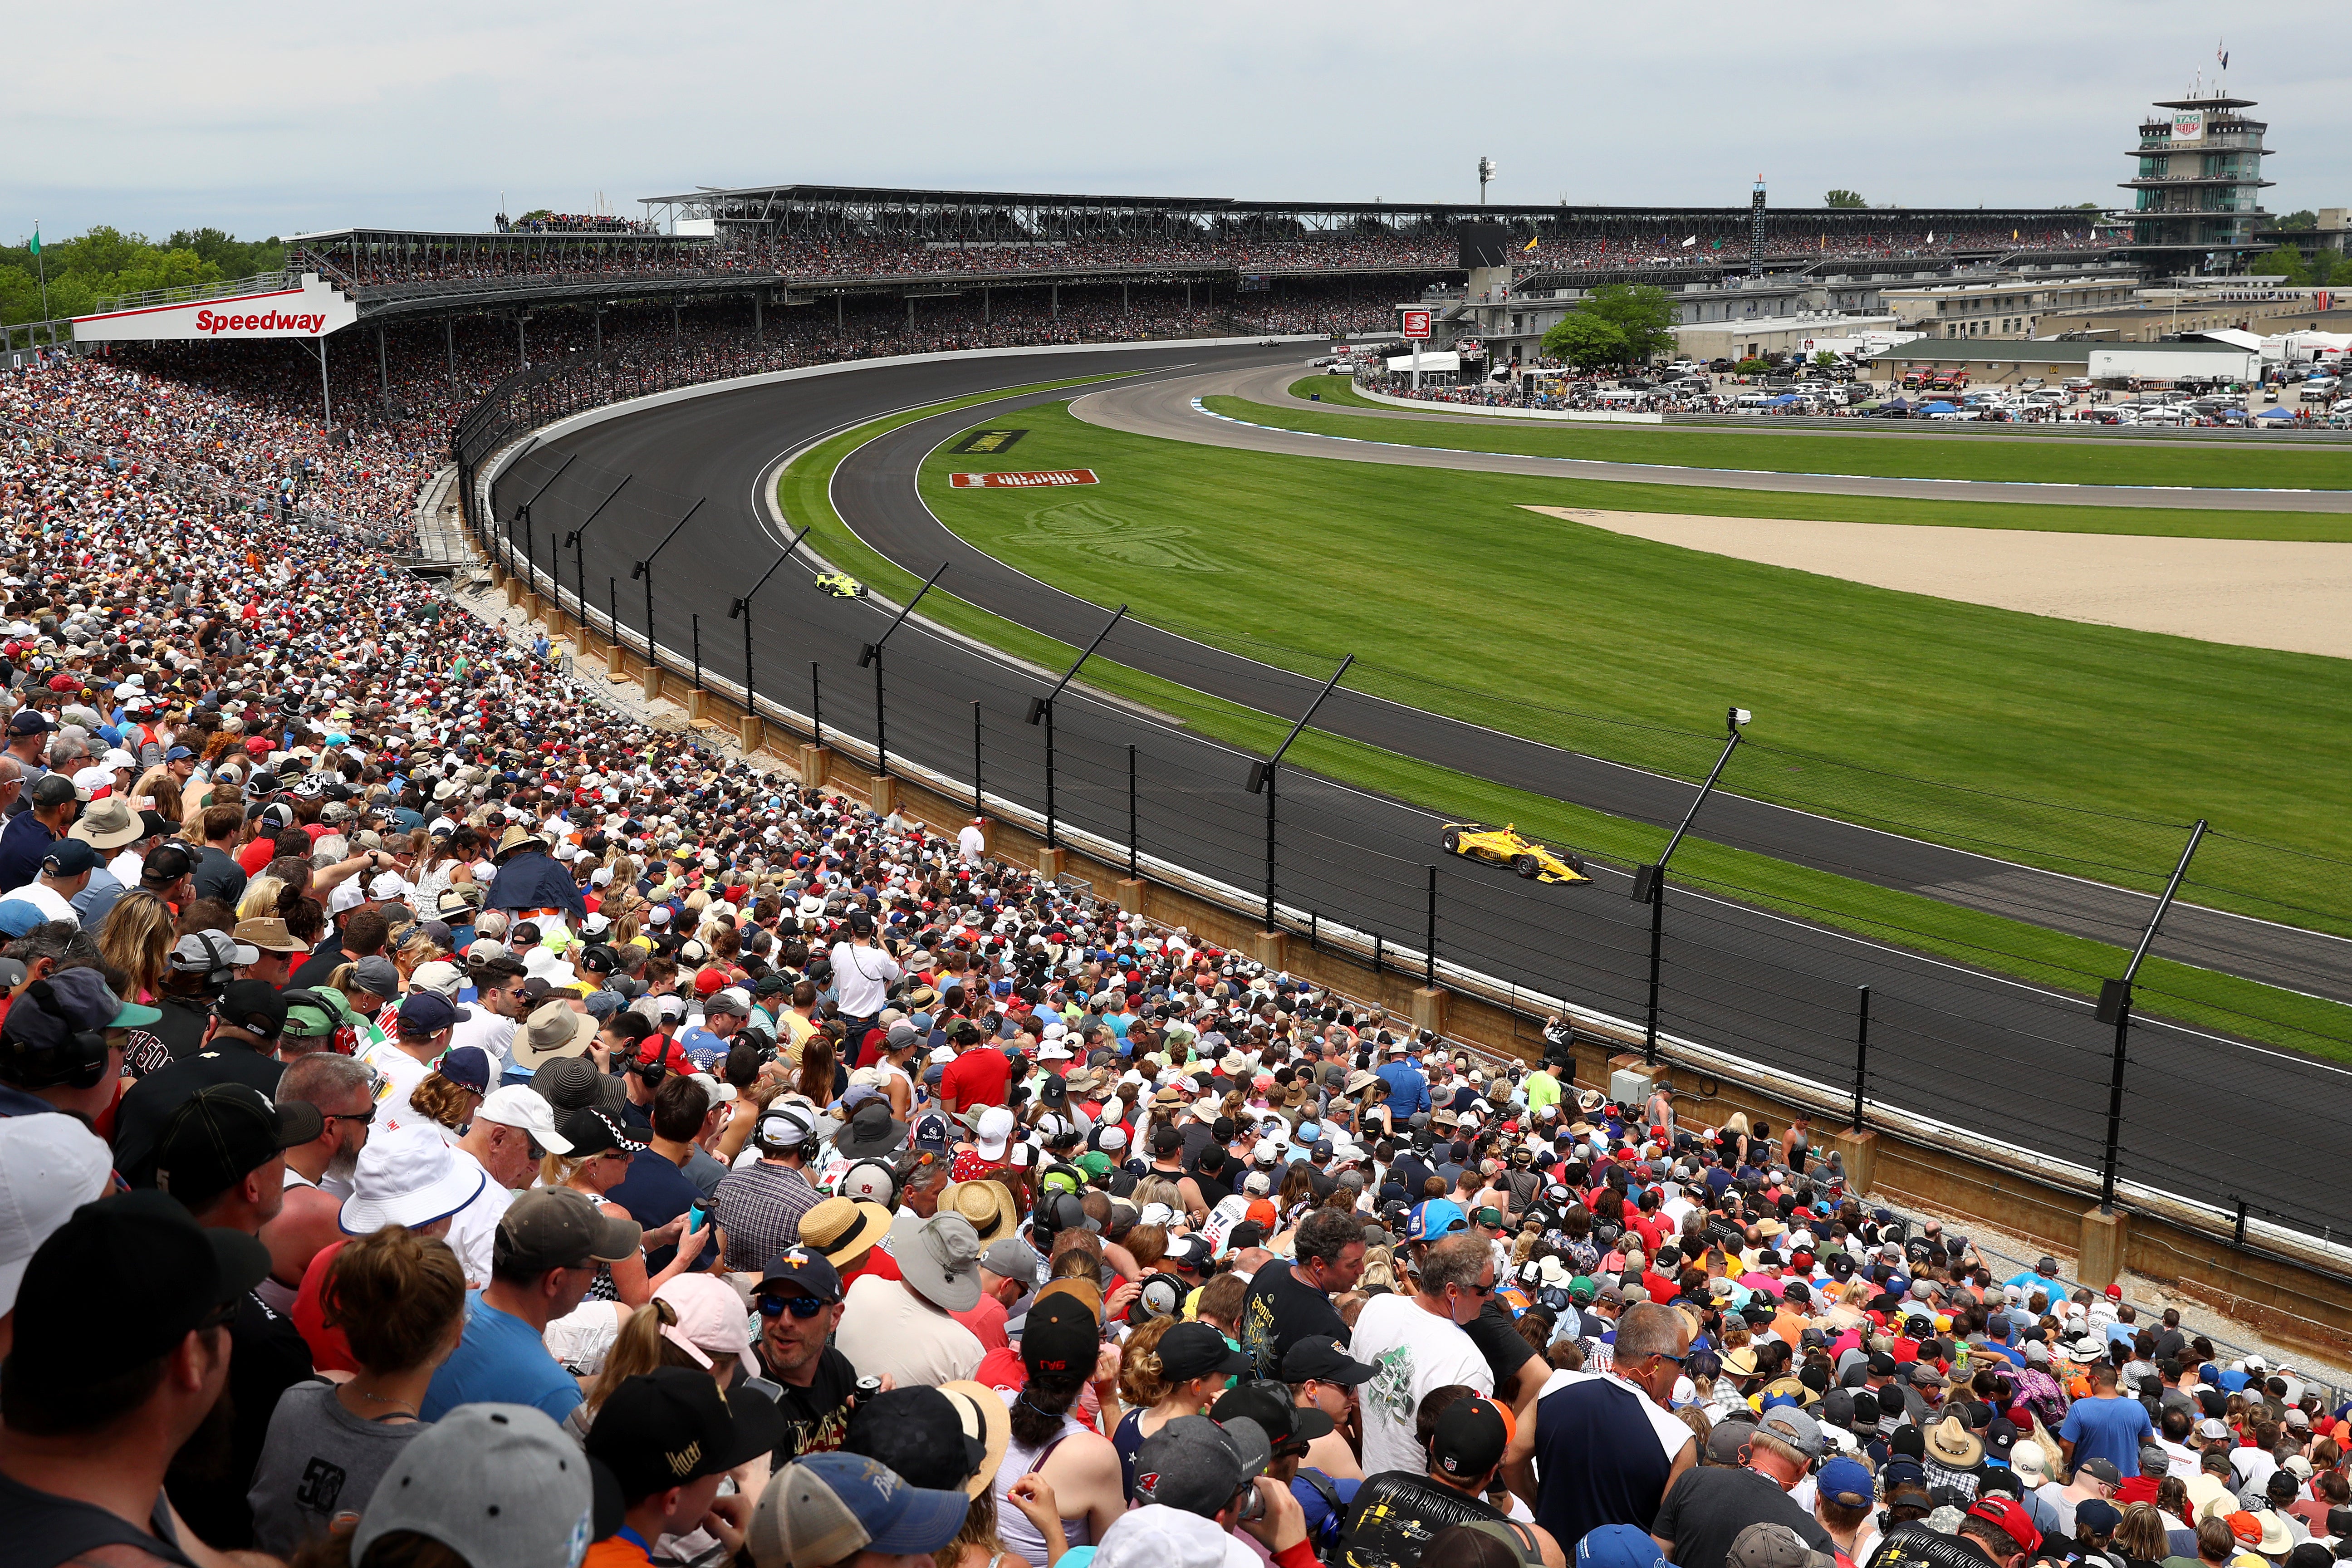 The Indianapolis 500 is one of the most popular sporting events in the world